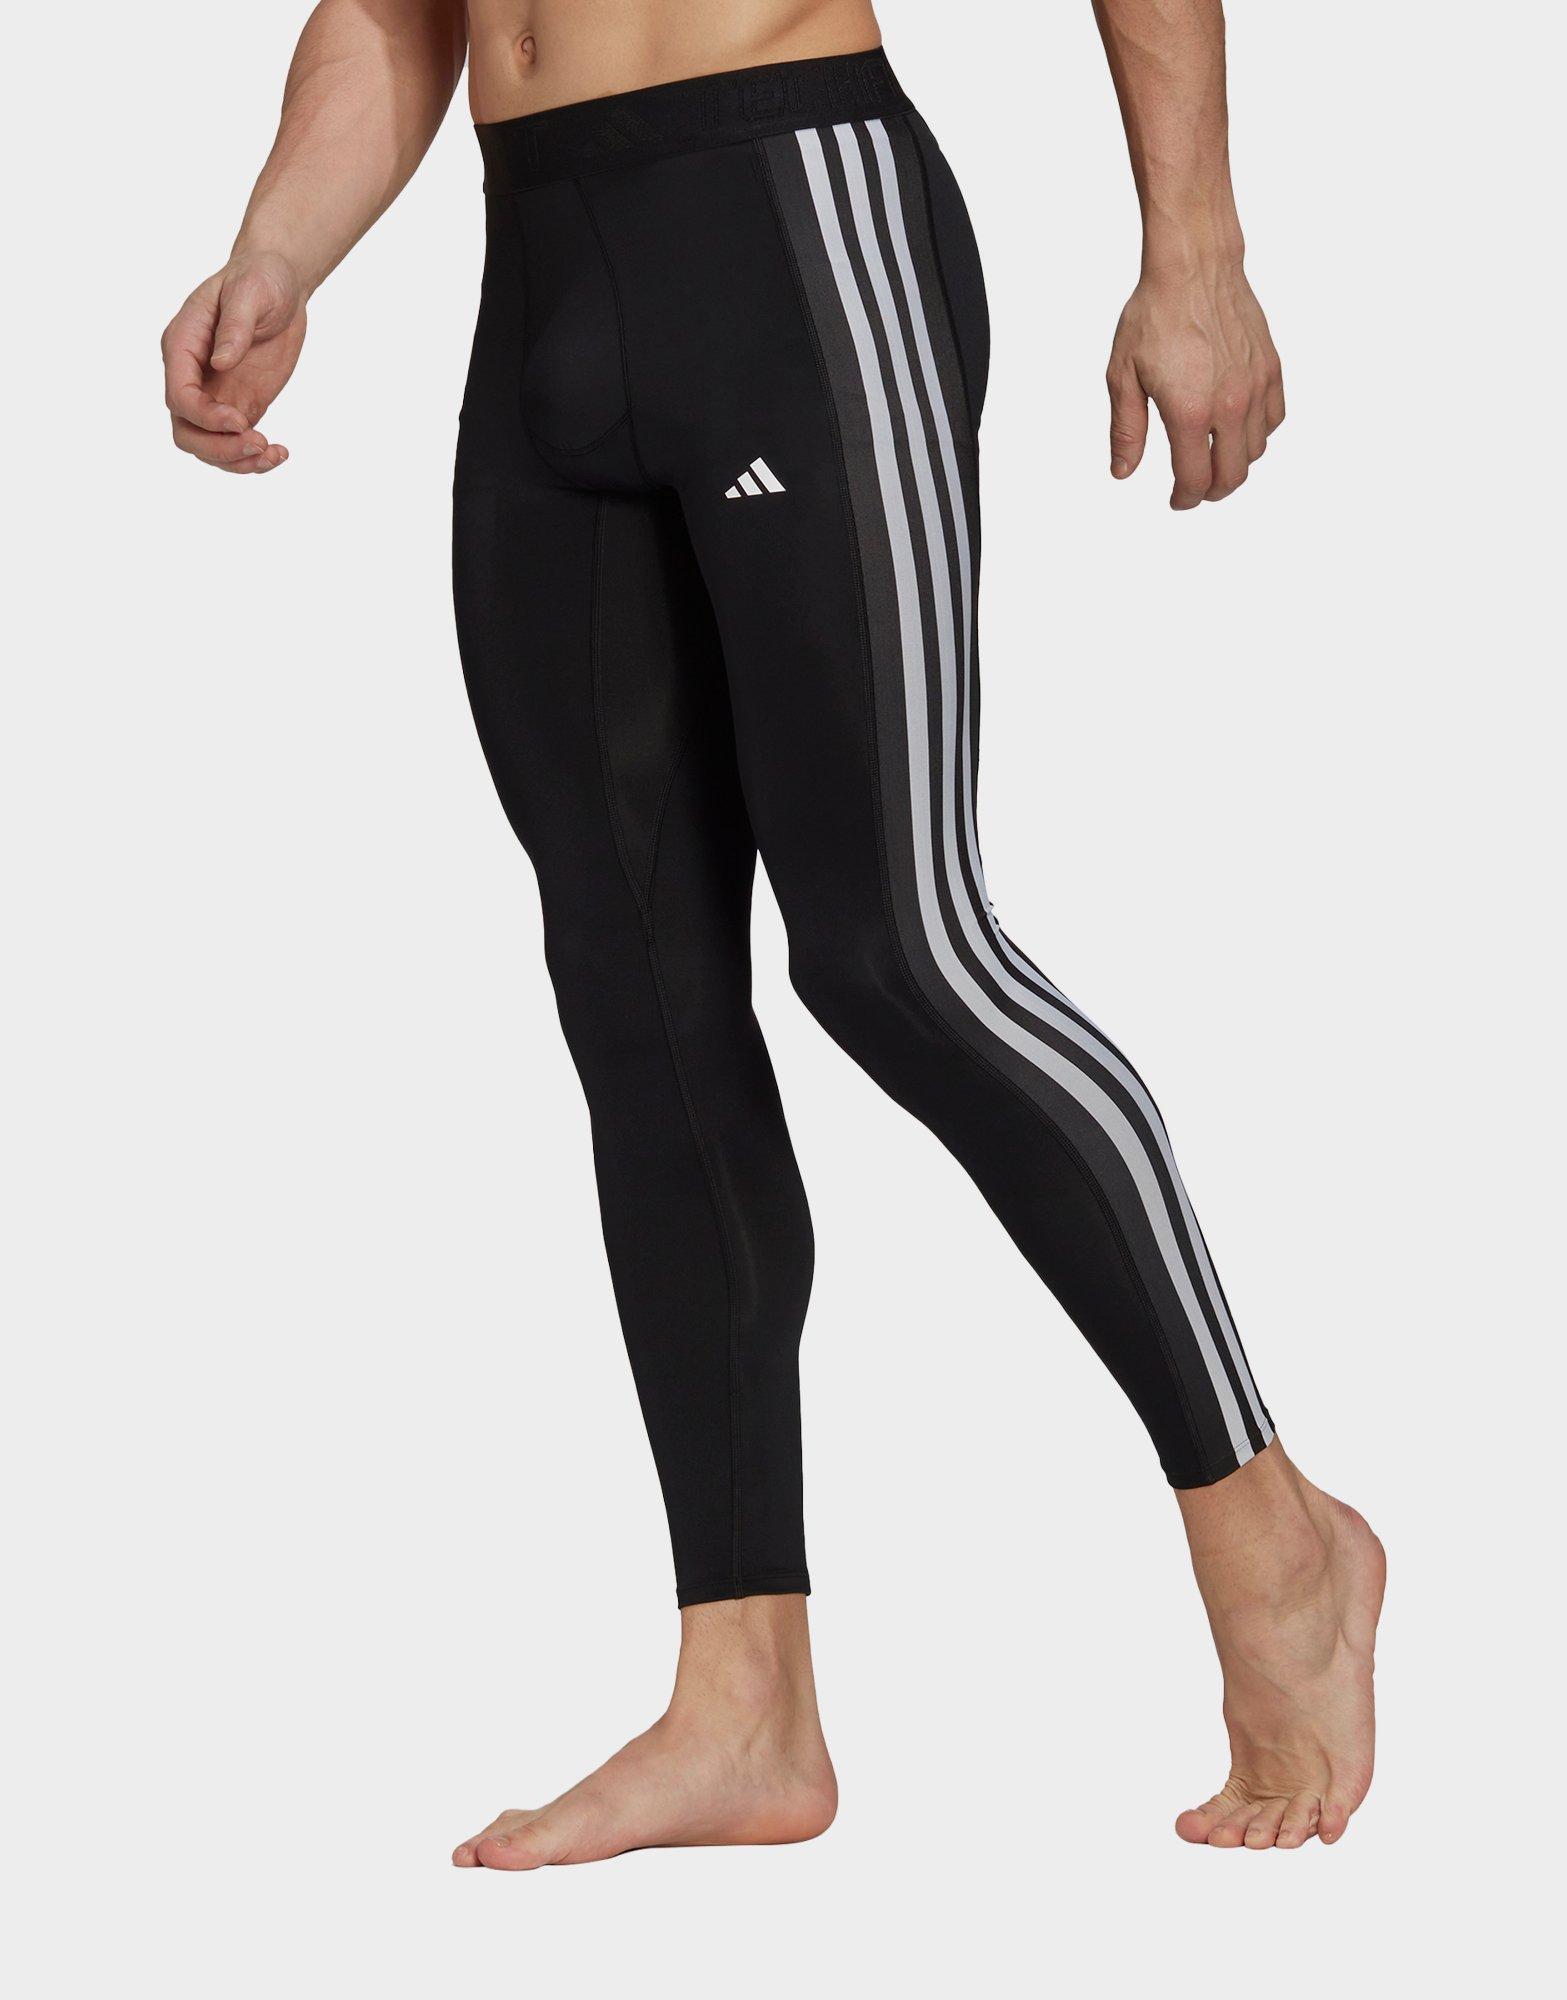 ADIDAS Womens Loungewear Tights Small Black Mid Rise Athleisure SIZE: M, S,  1X 